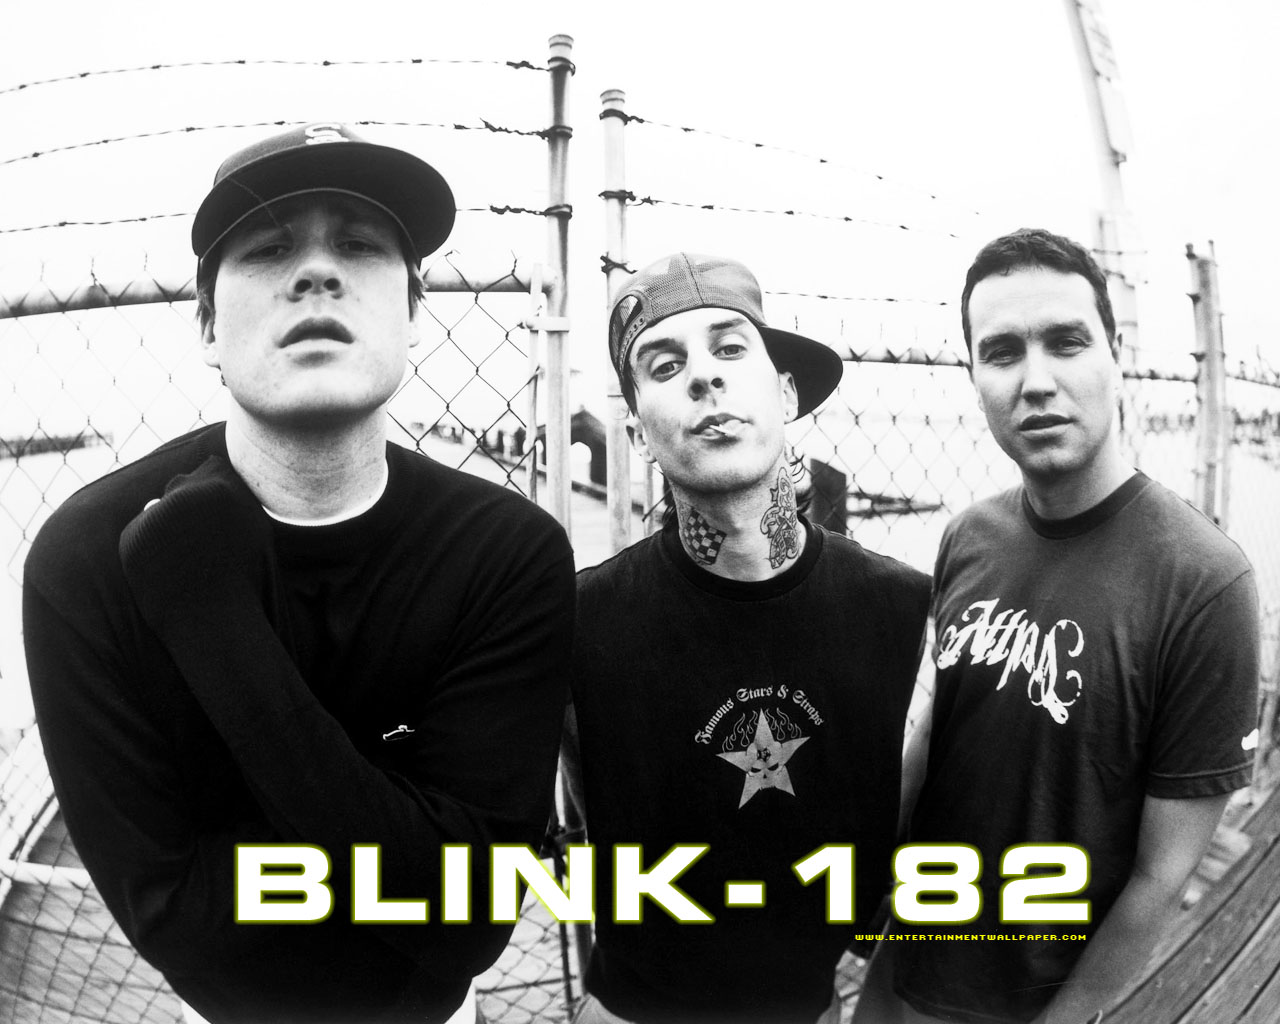 THE PINK TOOTHBRUSH BLOG..: Blink-182 cancel tour